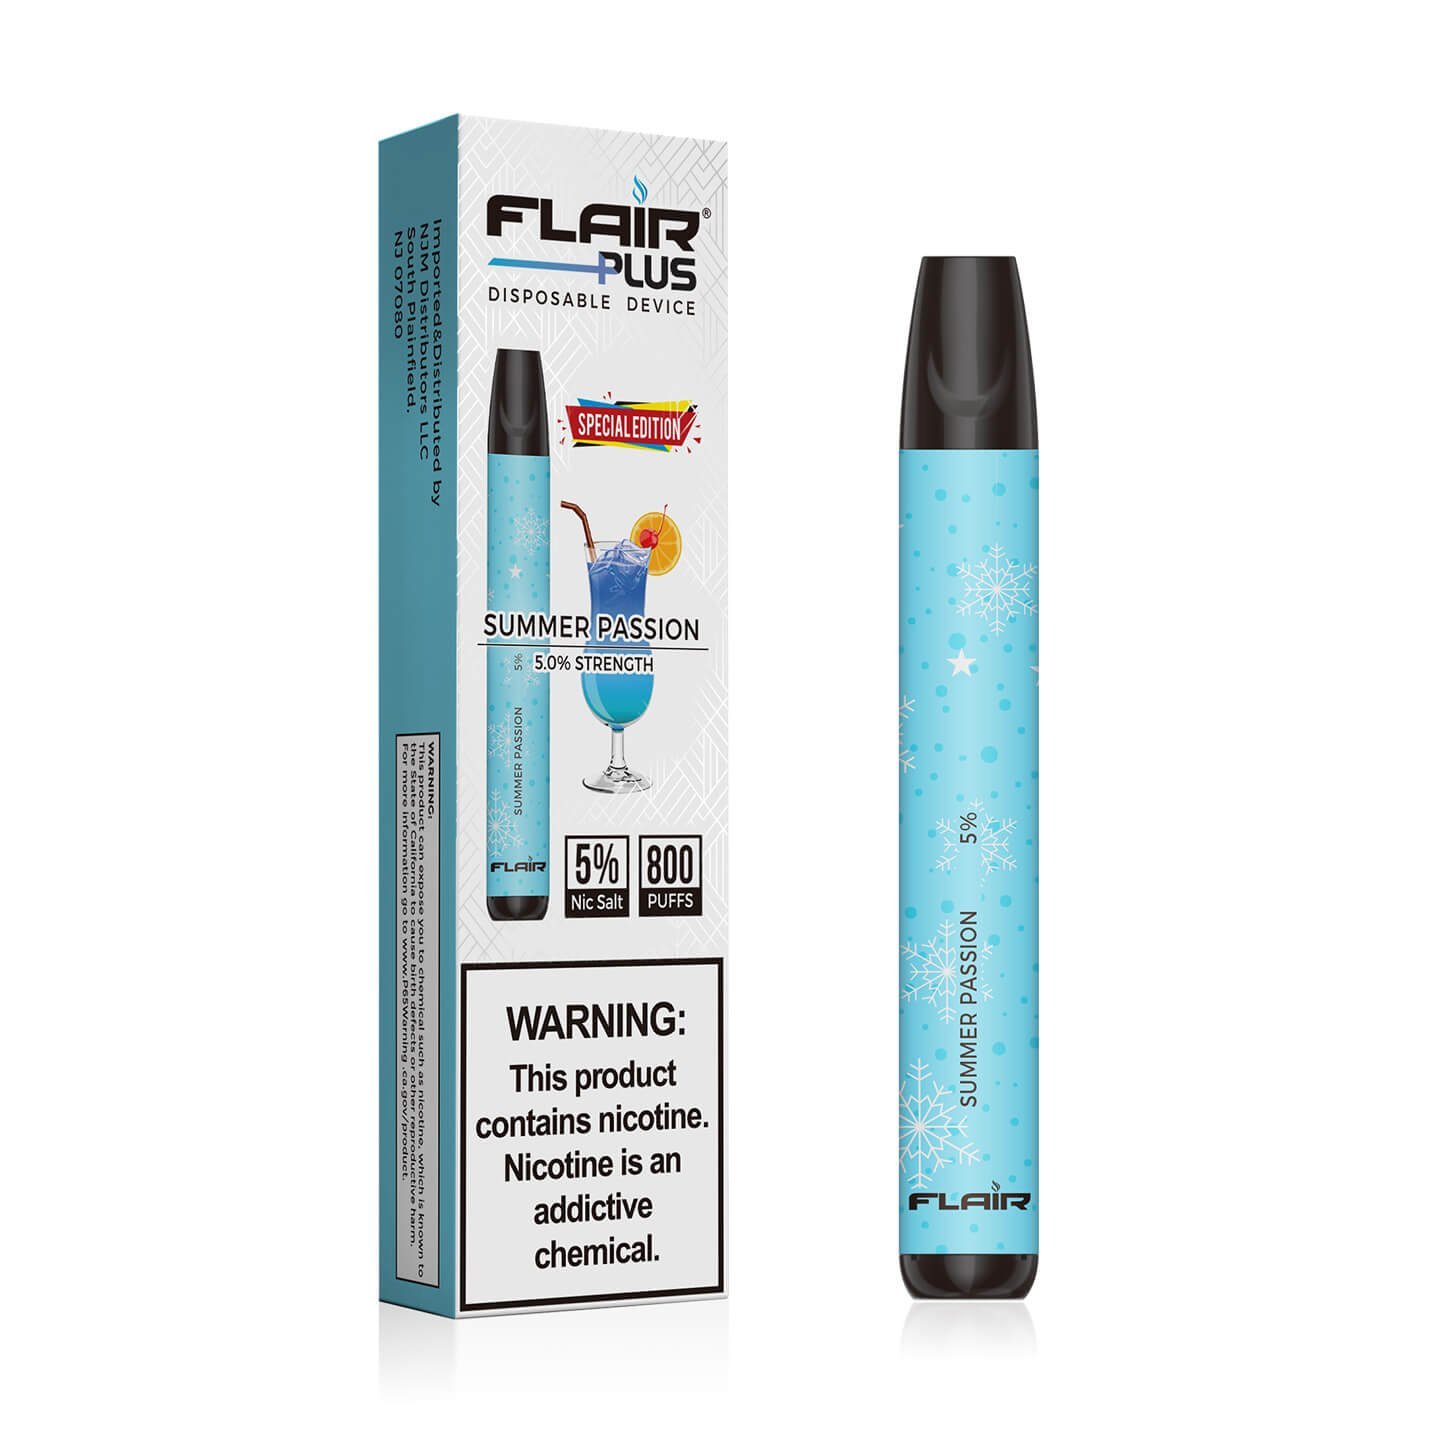 Flair Plus Disposable Devices (Summer Passion - 800 Puffs)